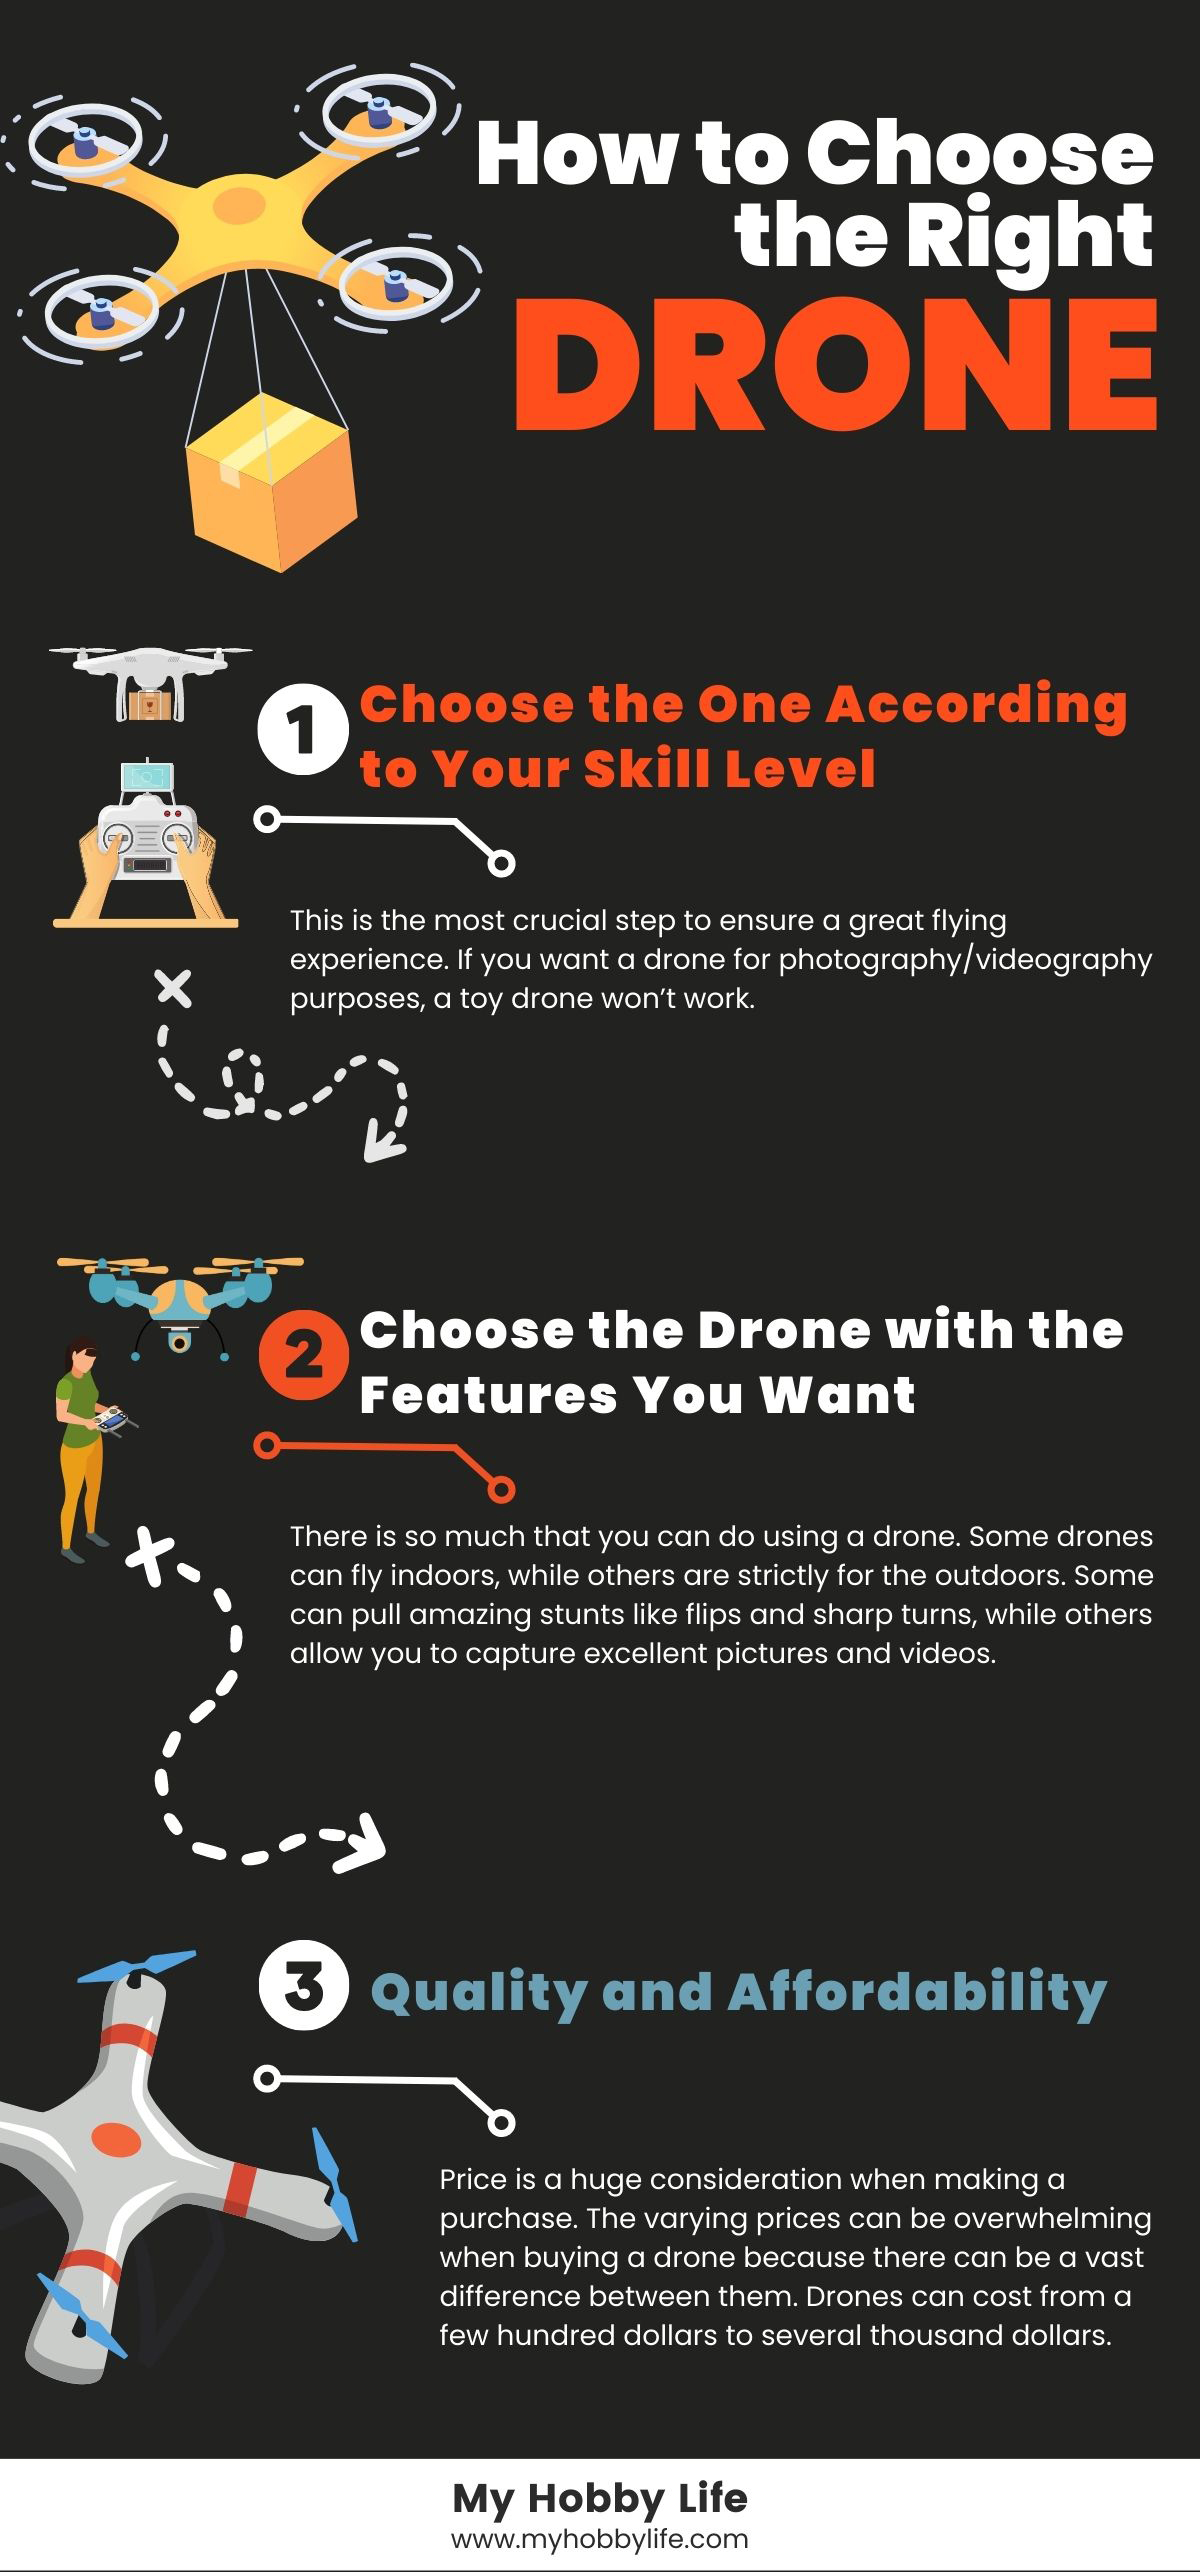 How to Choose the Right Drone